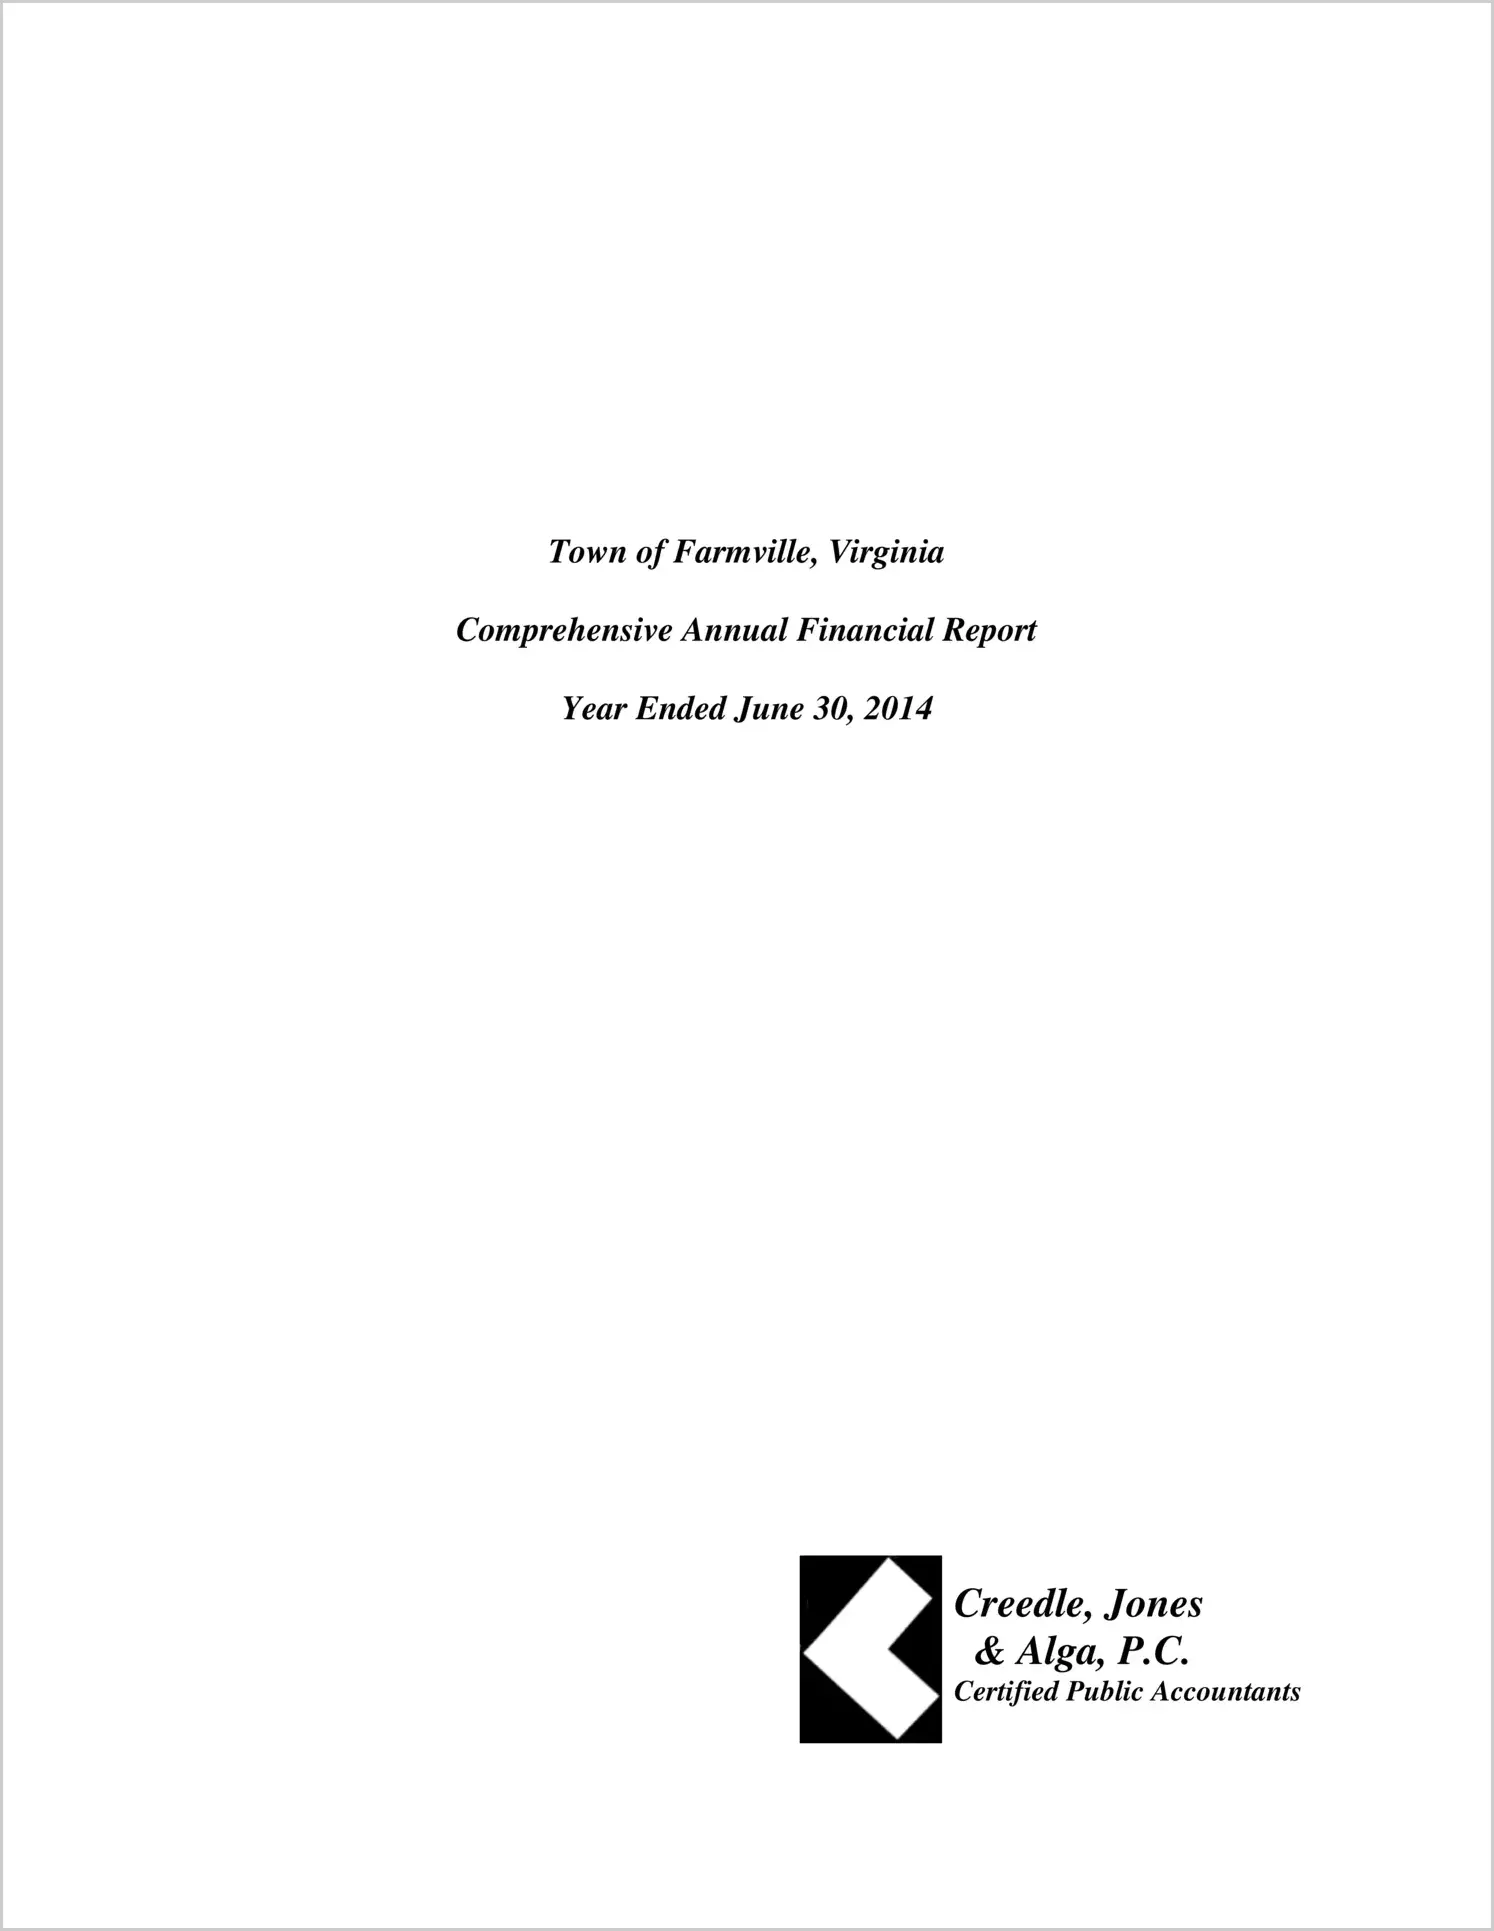 2014 Annual Financial Report for Town of Farmville